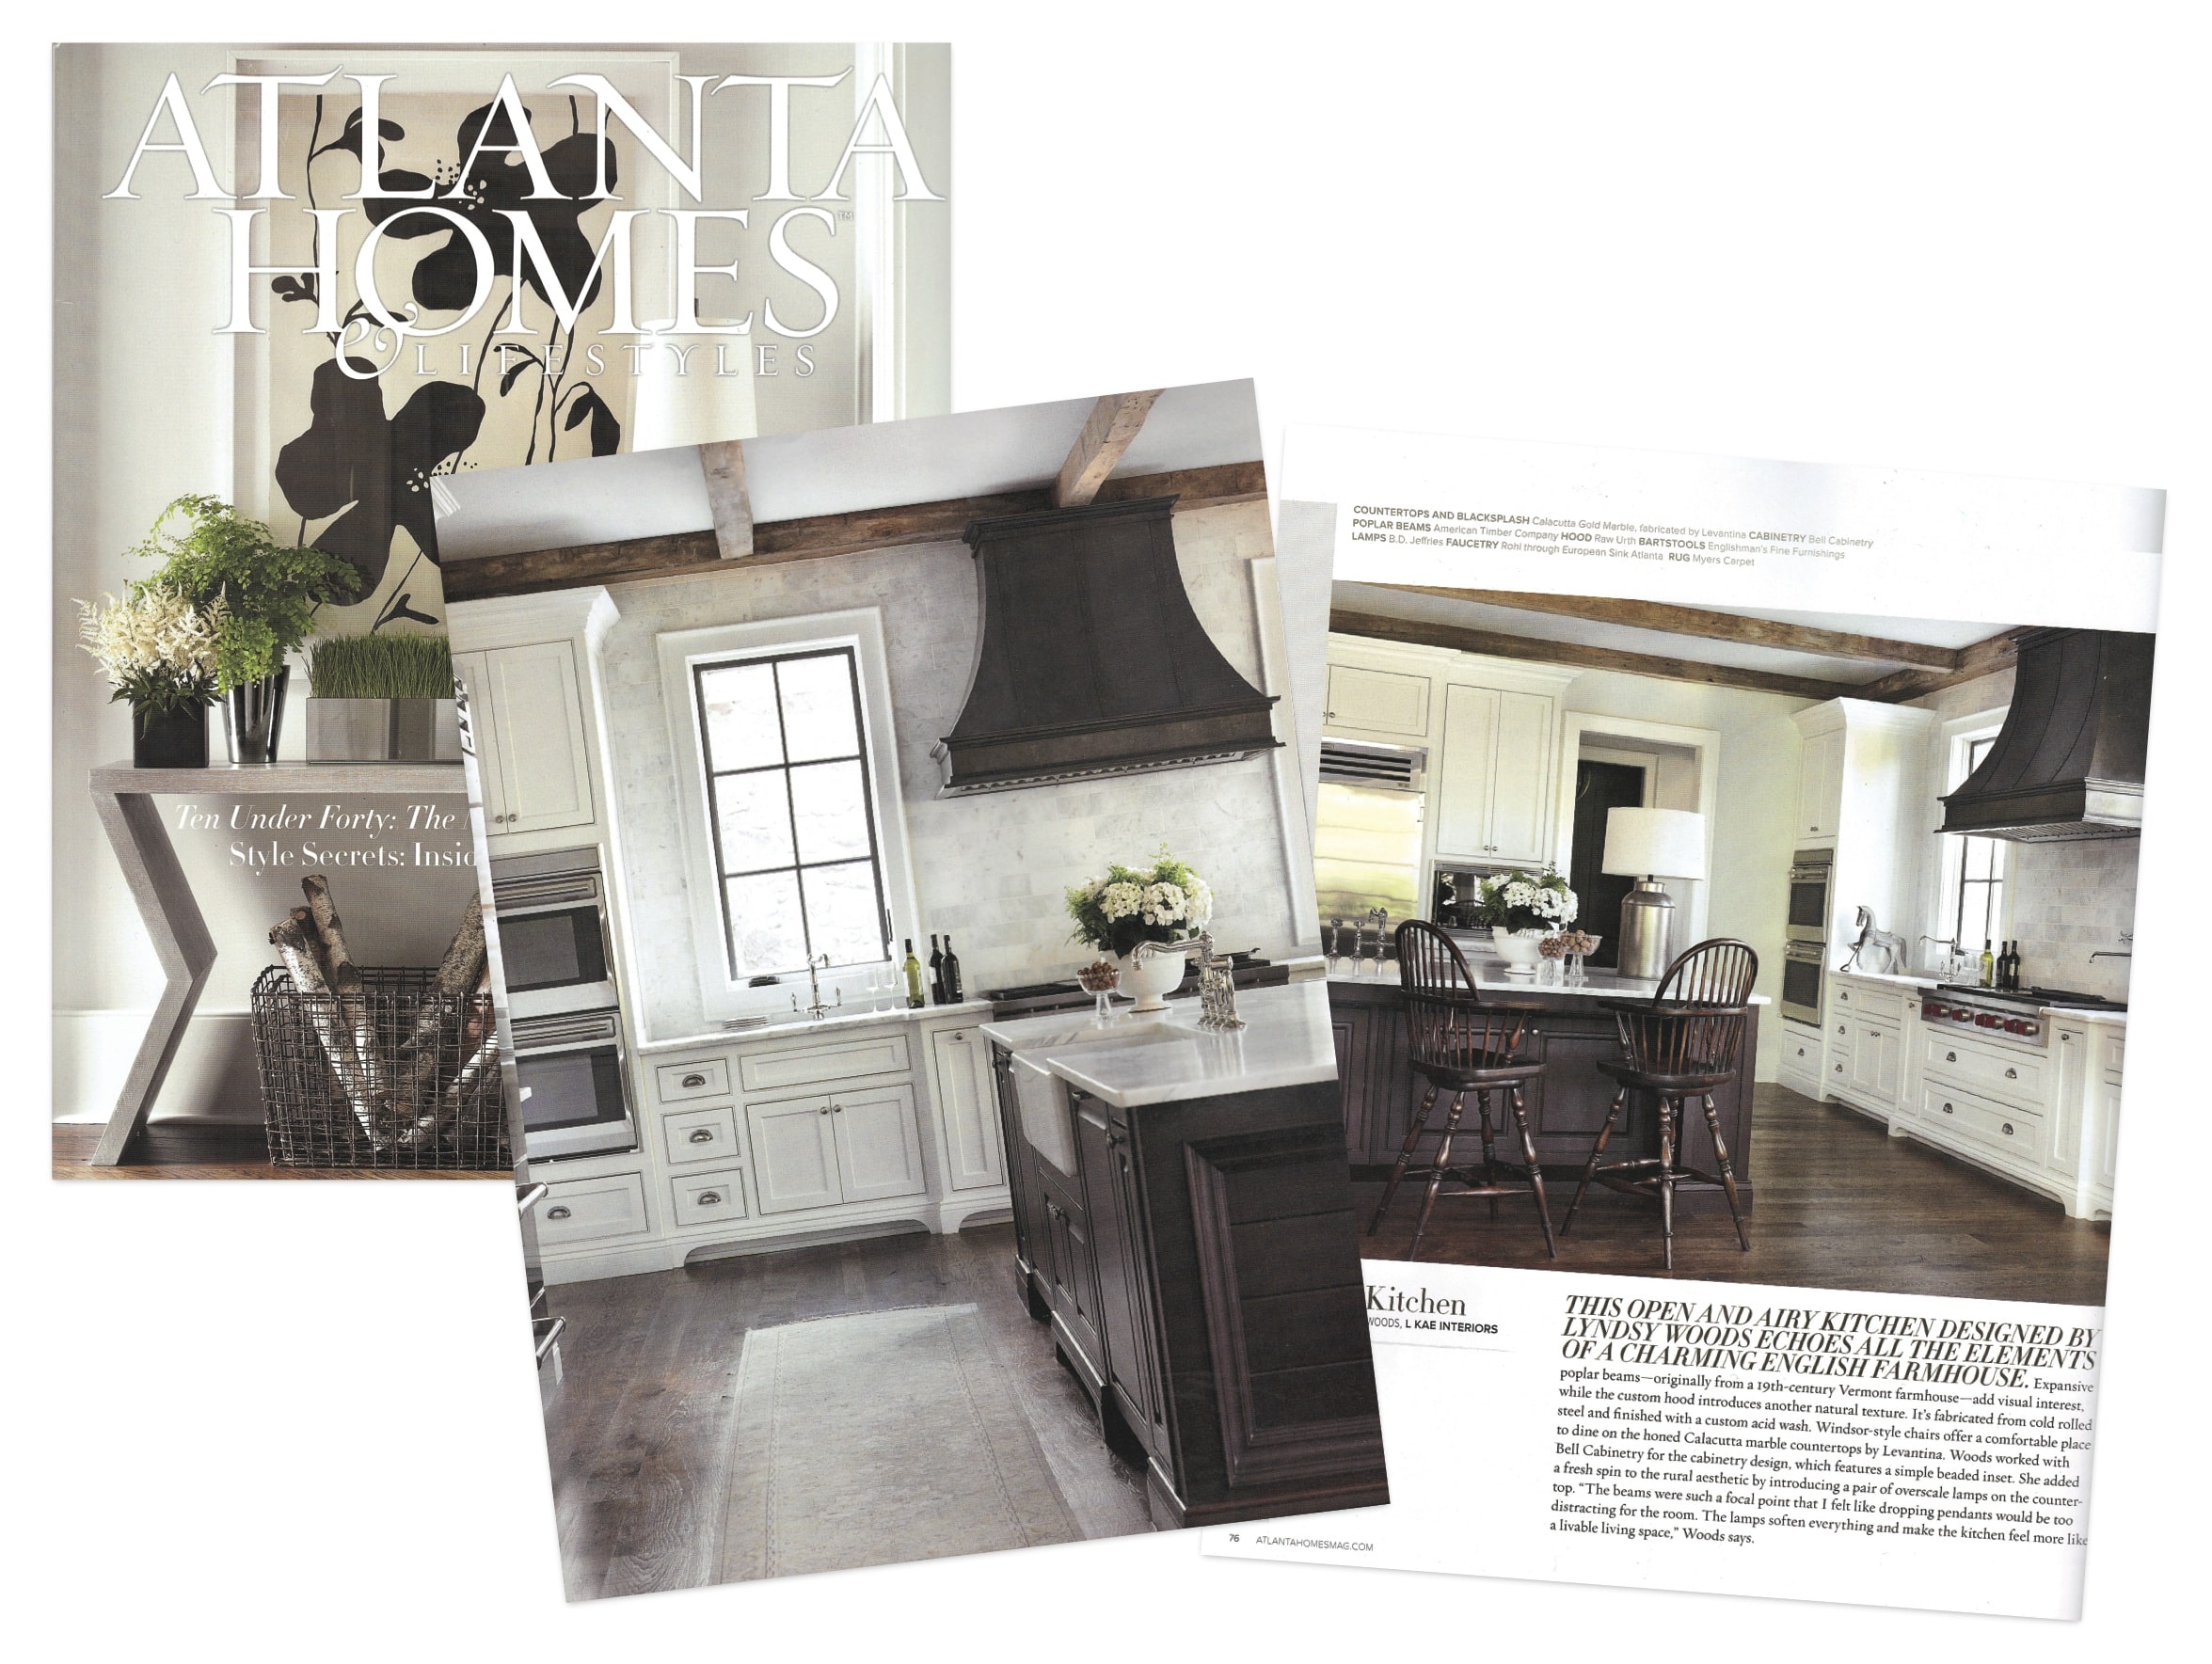 atlanta homes and lifestyle scan featuring custom montrose range hood in dark washed patina finish